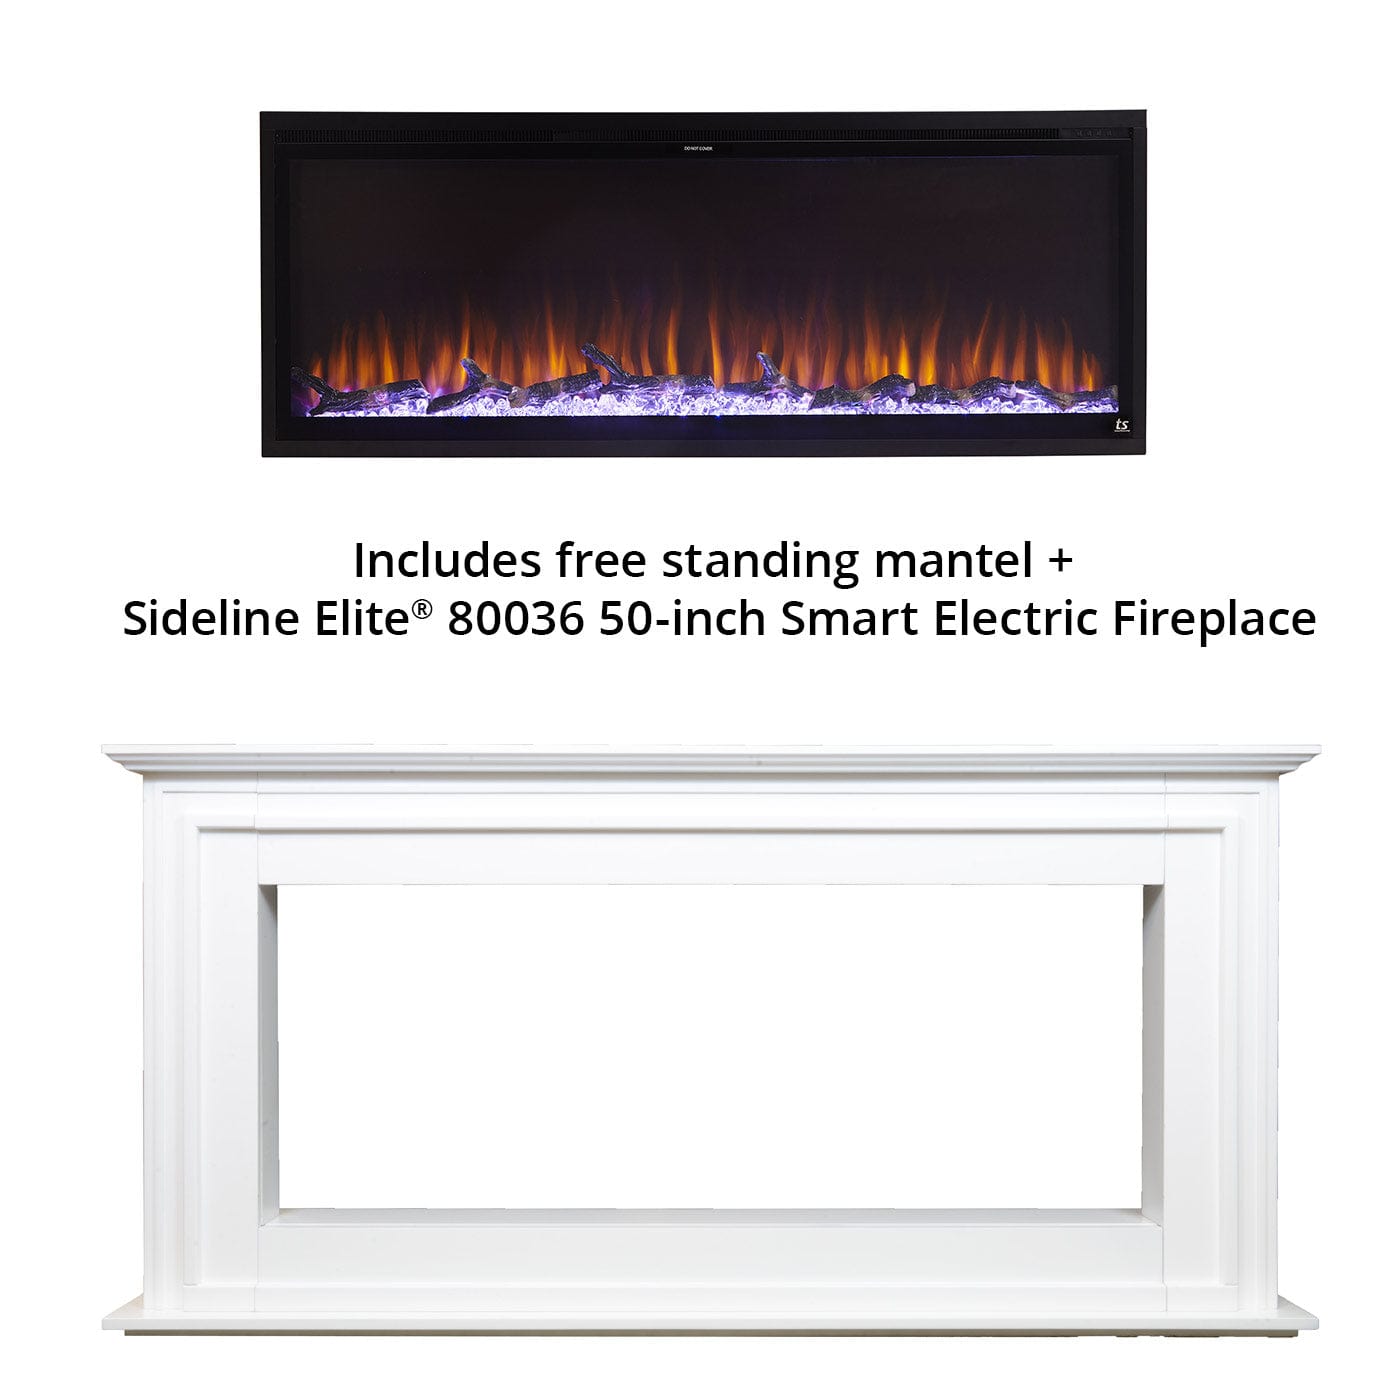 This freestanding mantel features a classic white mantel plus the Touchstone Sideline Elite 50 Smart ElectricFireplace